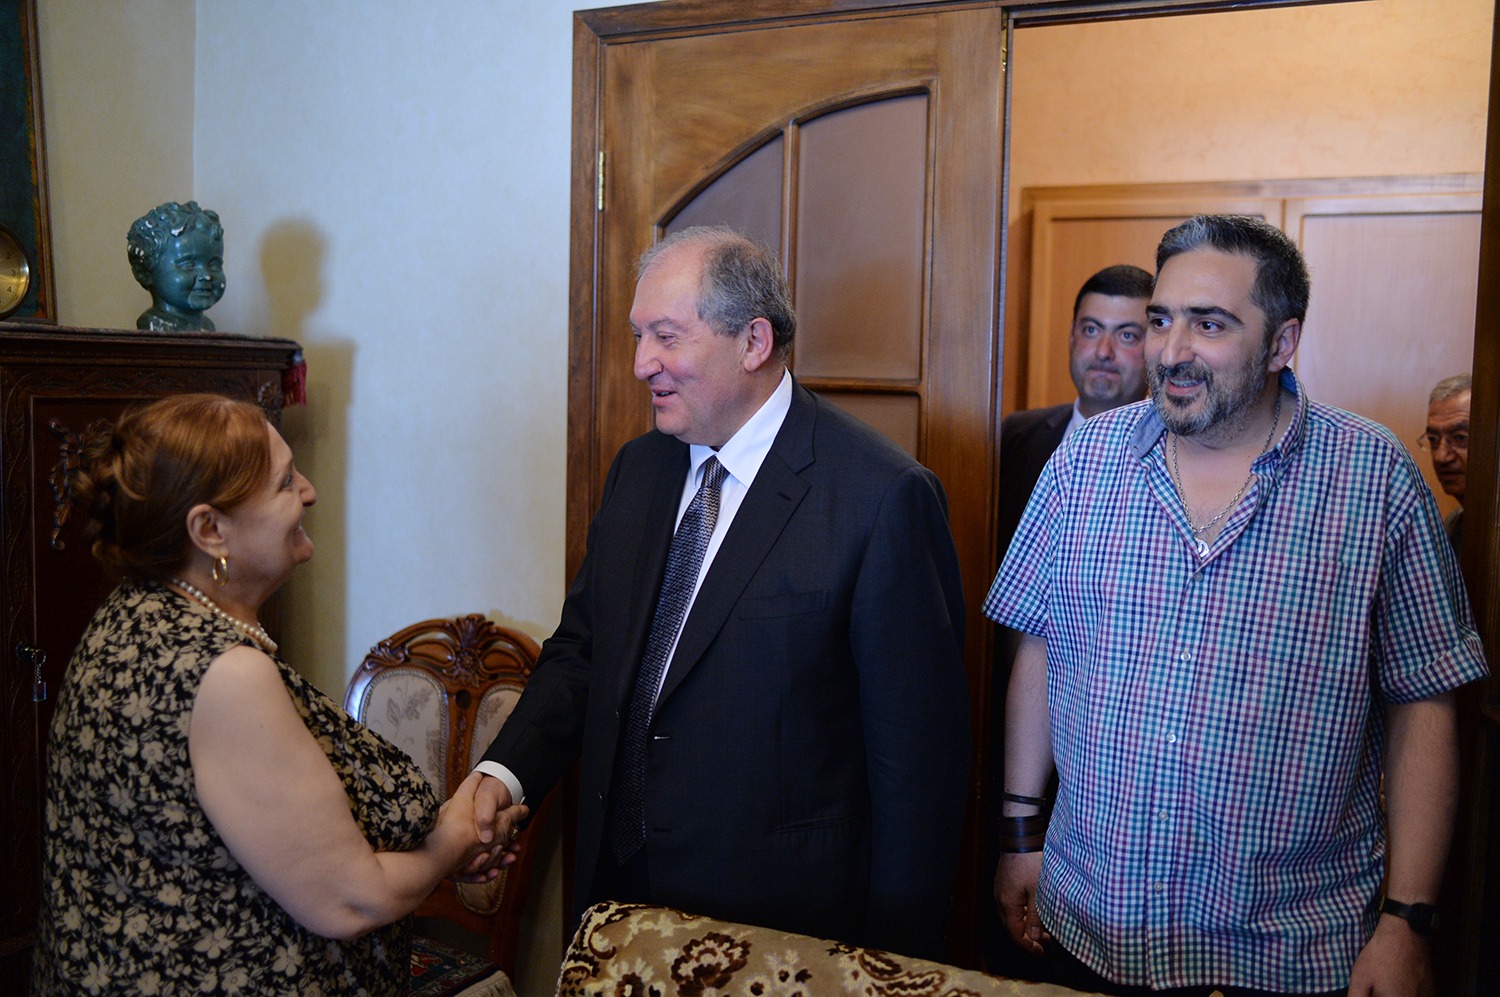 President Sarkissian visited the studio of the great artist Minas Avetissian